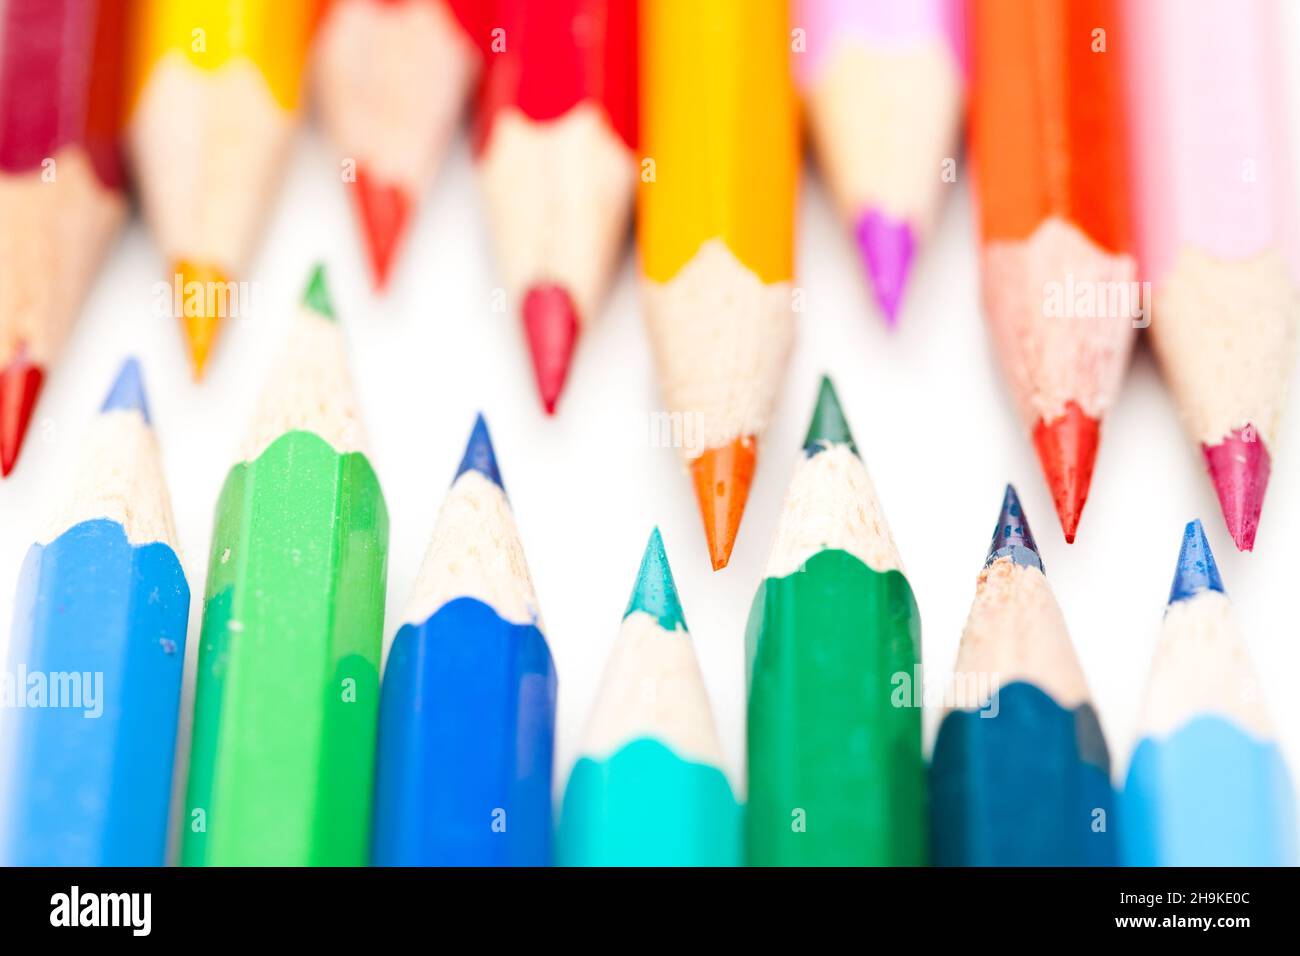 crayons, pencils, paint, straight, against each other, tip, pen cold, warm, hue, together, tips, colorful, grouper, selection, wood, many, several, a Stock Photo